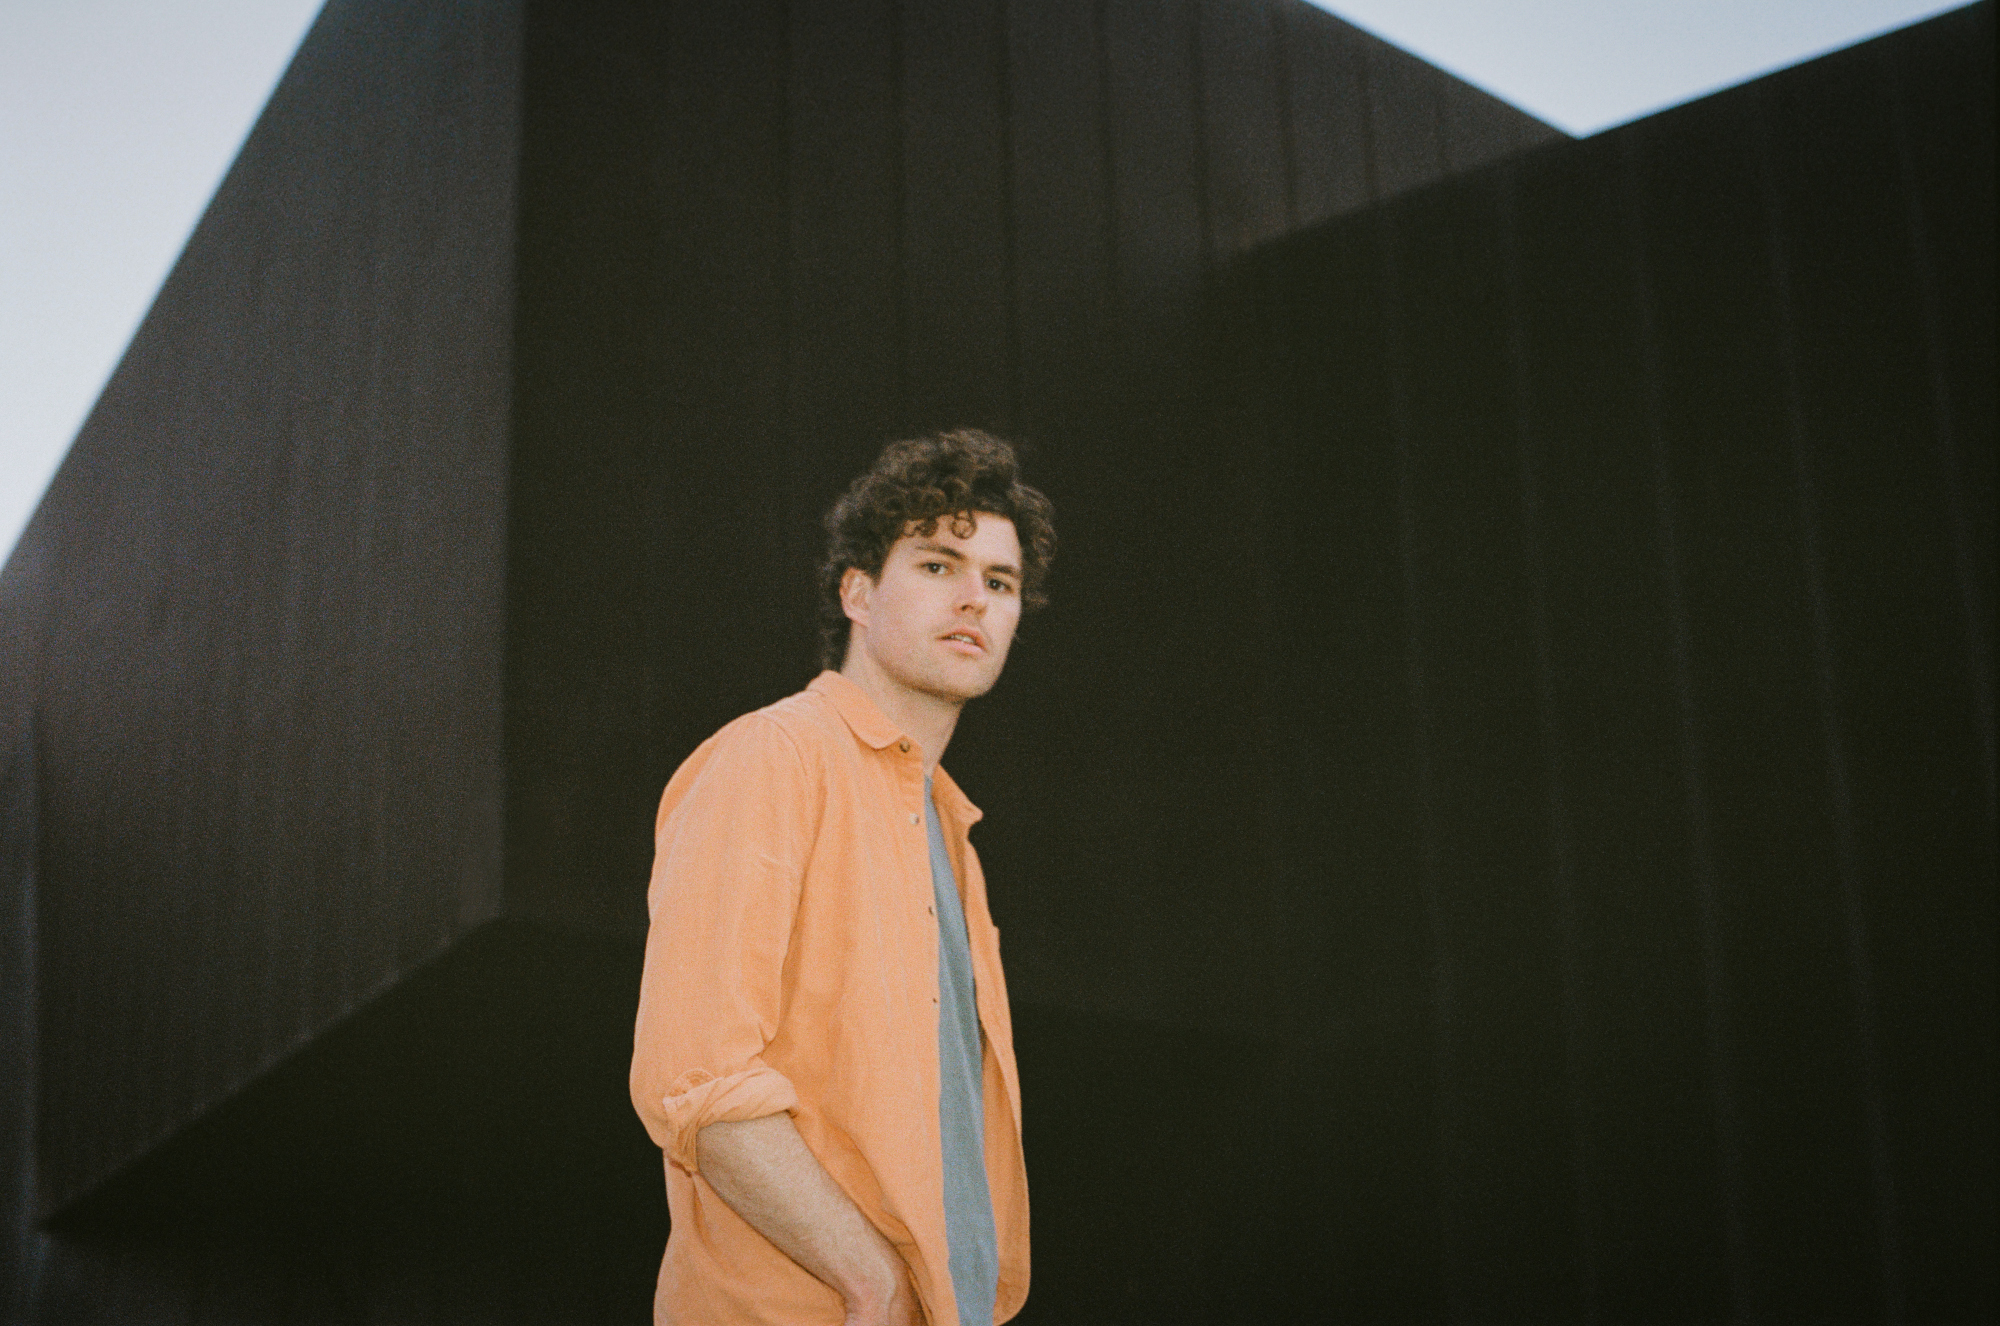 Vance Joy Releases New Song ‘Missing Piece’ With Video